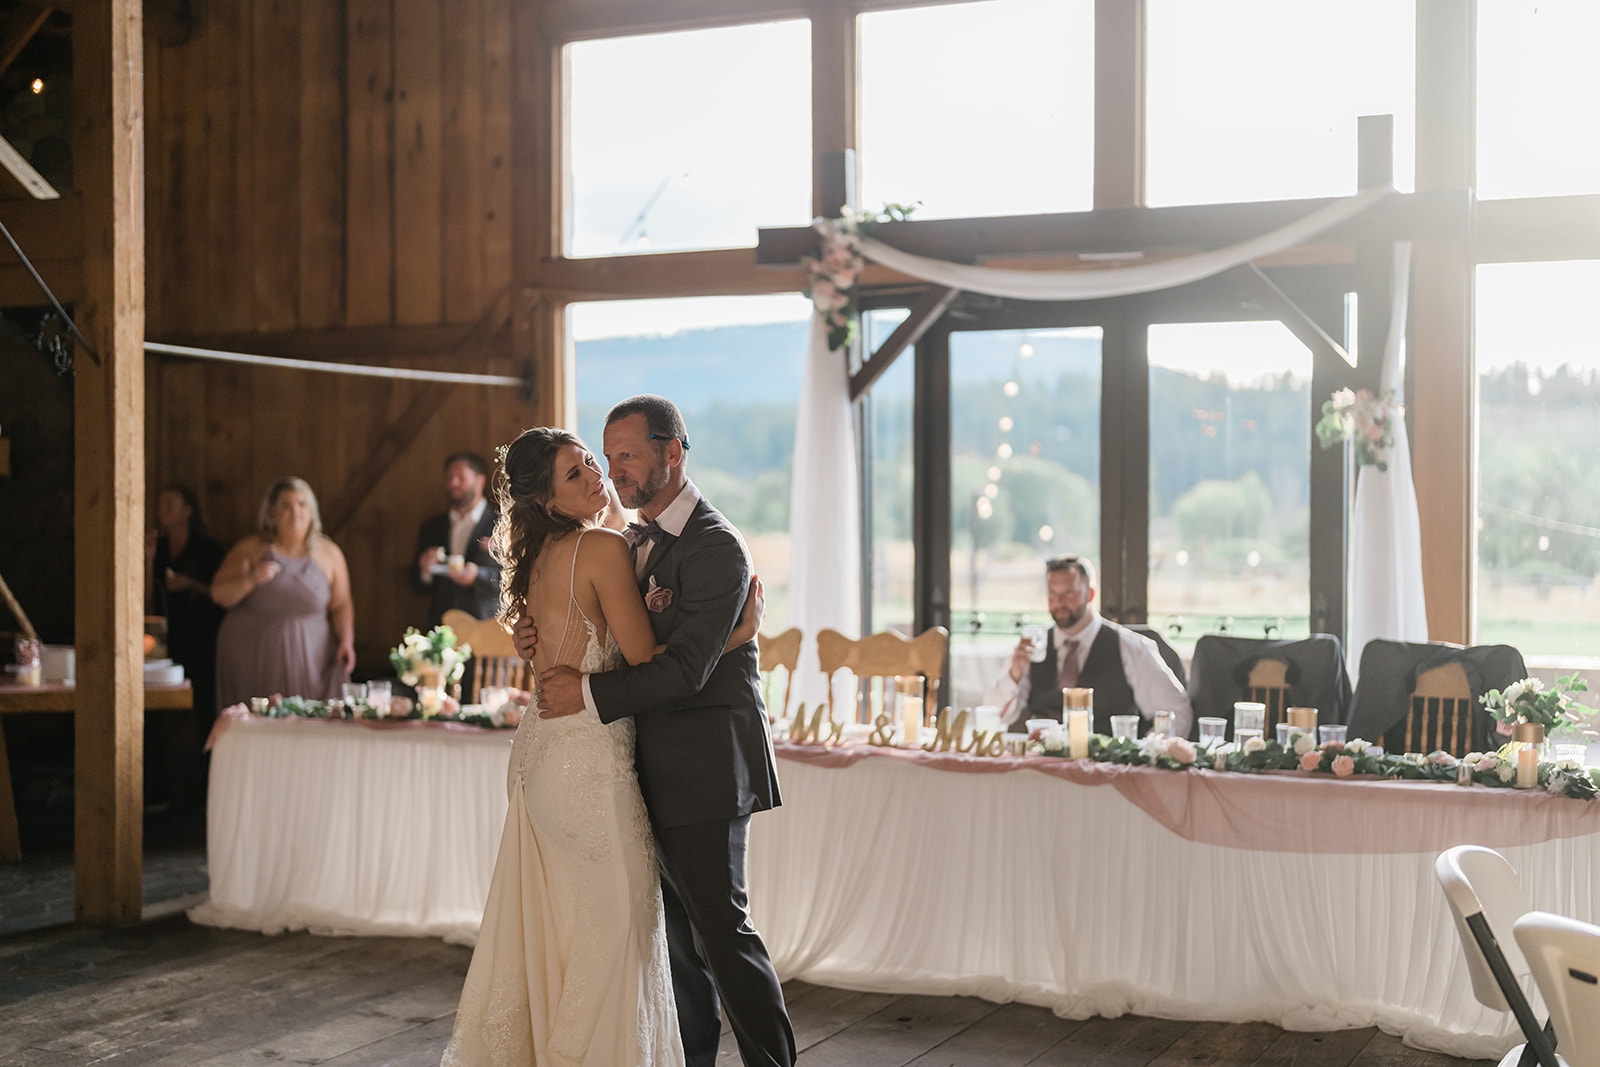 Groomsman and Bride dancing at a Cattle Barn Wedding